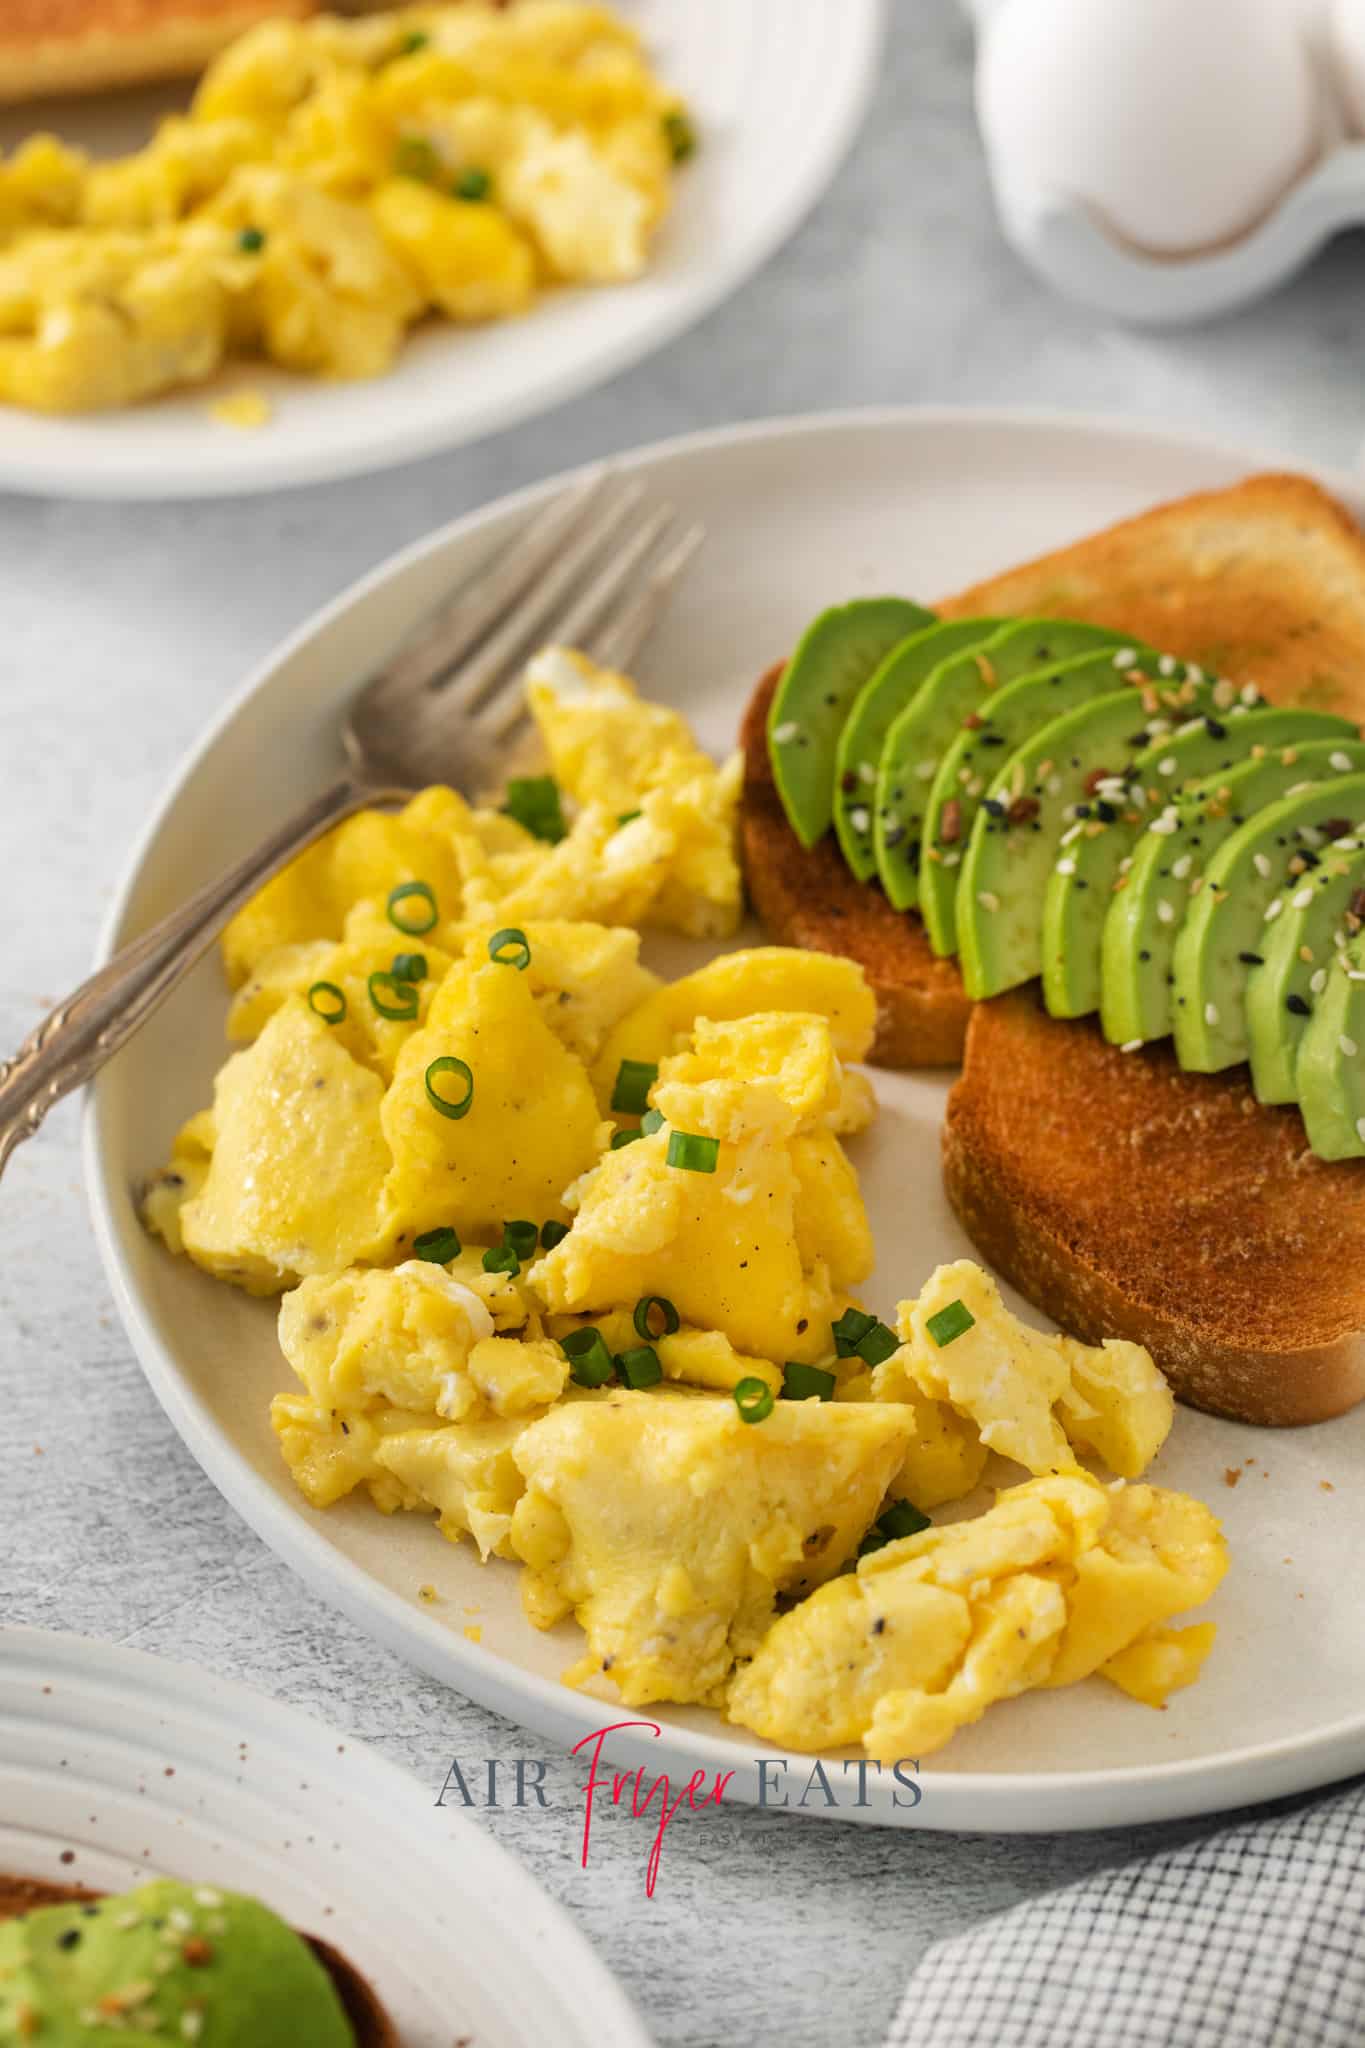 a plate of scrambled eggs that were cooked in an air fryer, garnished with green onion and served with a slice of toast with avocado.